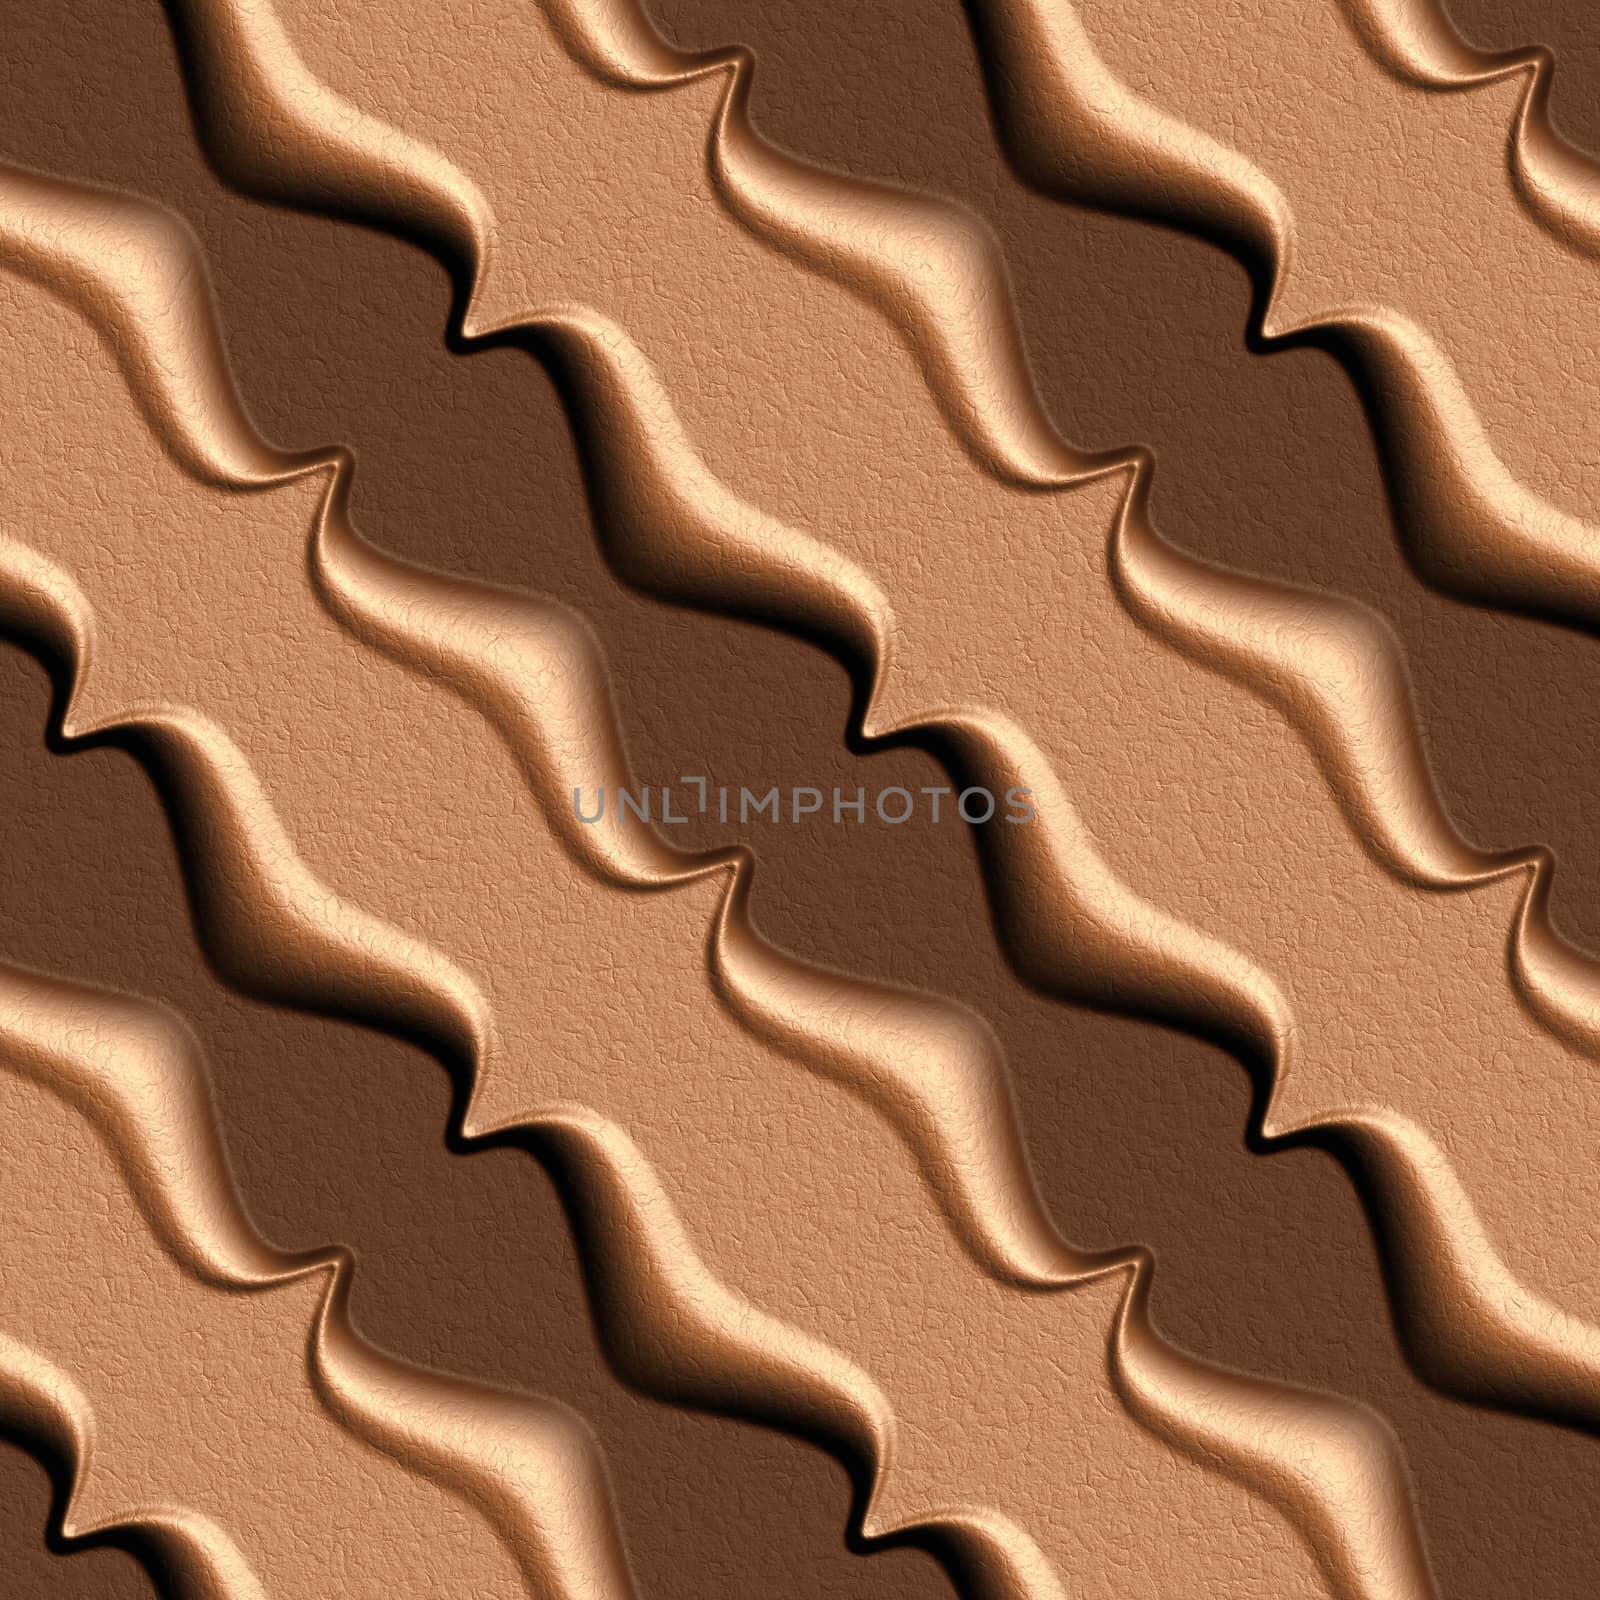 Brown Skin Illustrations, 3D seamless background pattern.